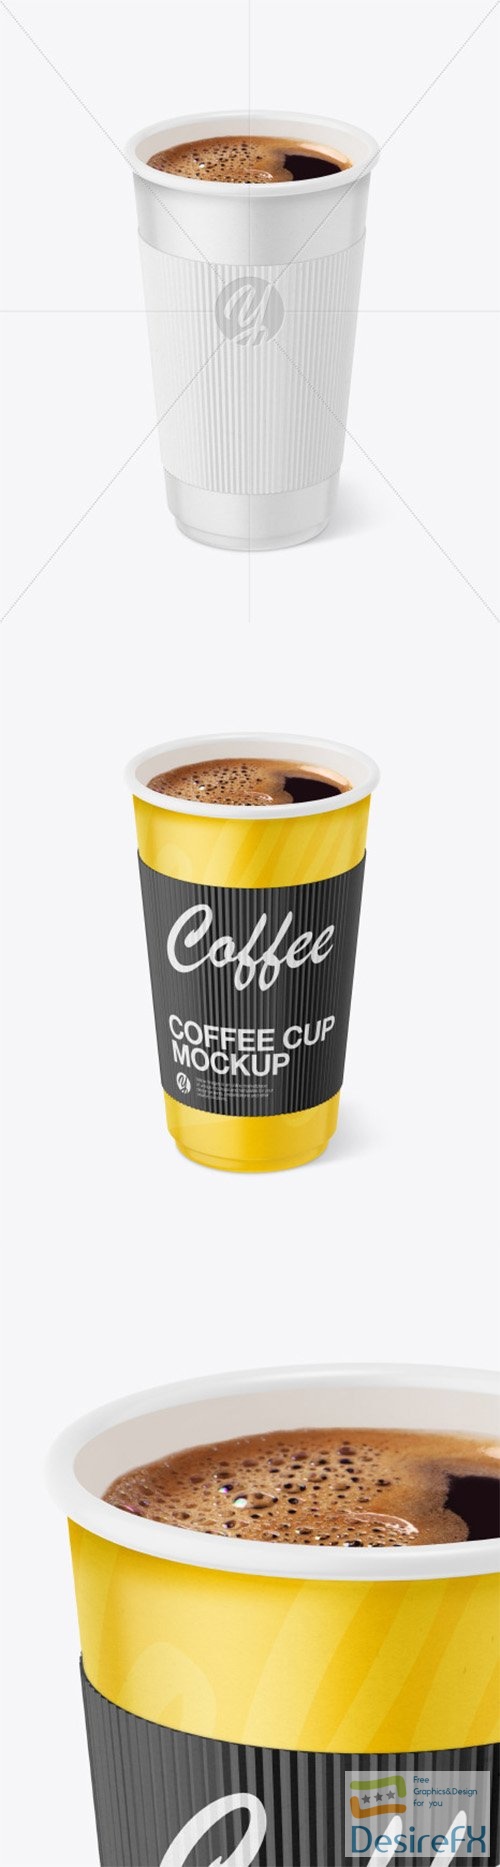 Paper Coffee Cup With Holder Mockup 78700 TIF